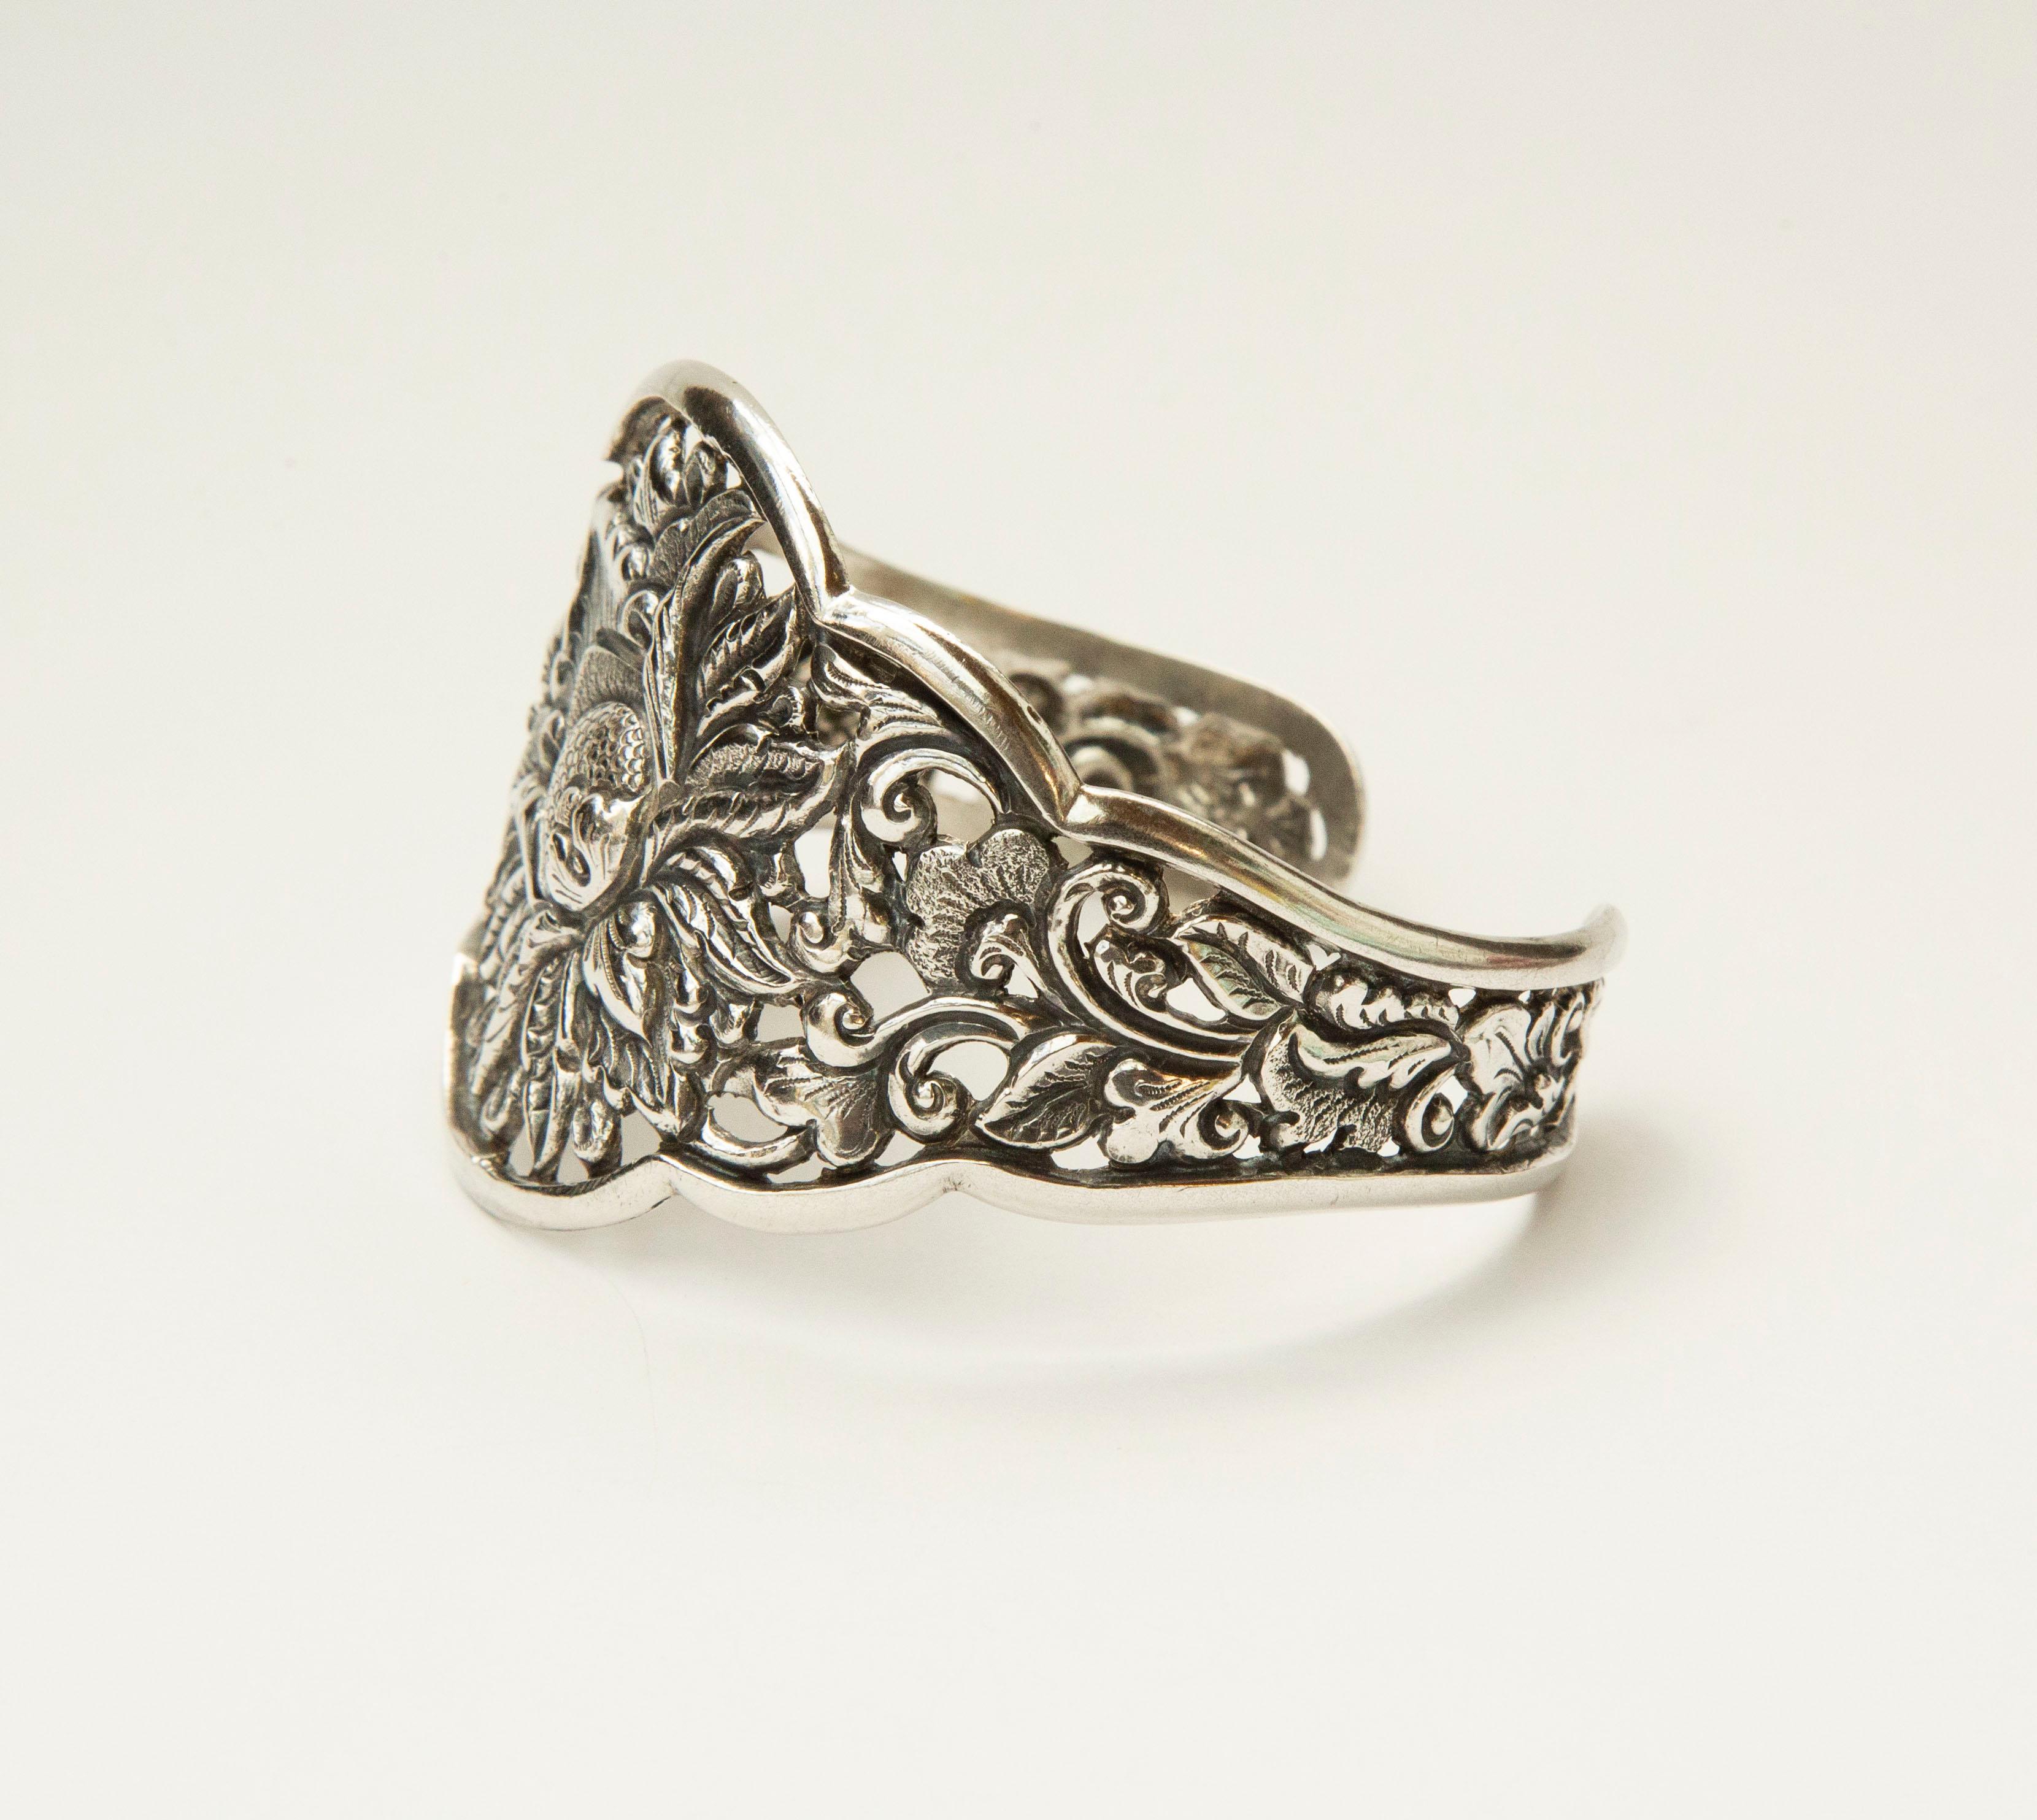 Vintage Indonesian Silver 800 Cuff Bracelet with Floral Decor CA. 1930s For Sale 2